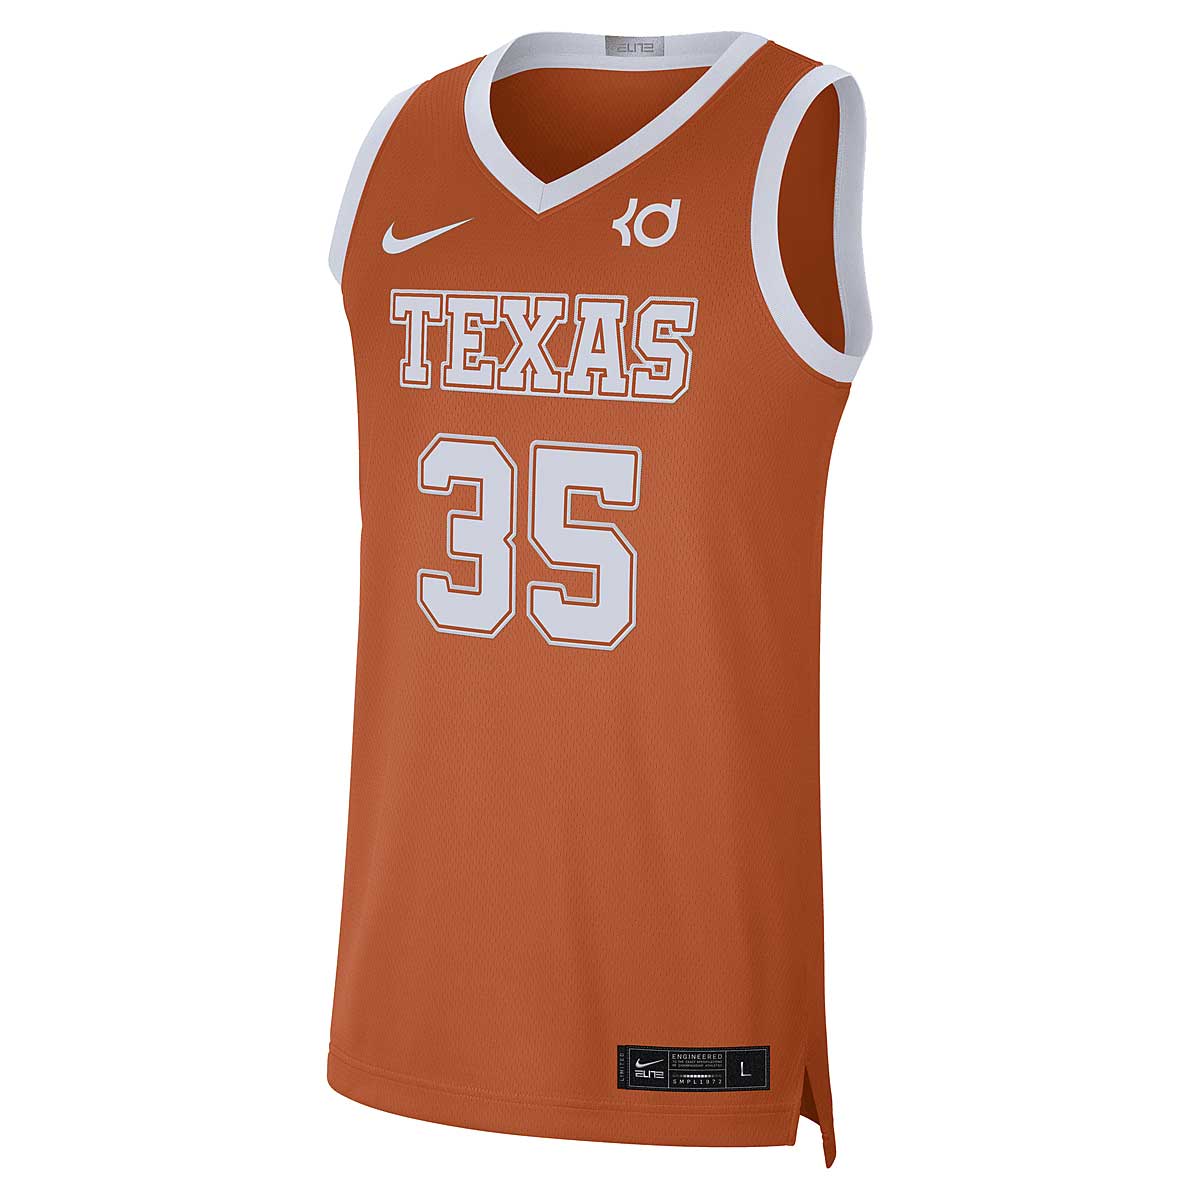 kevin durant jersey shirt